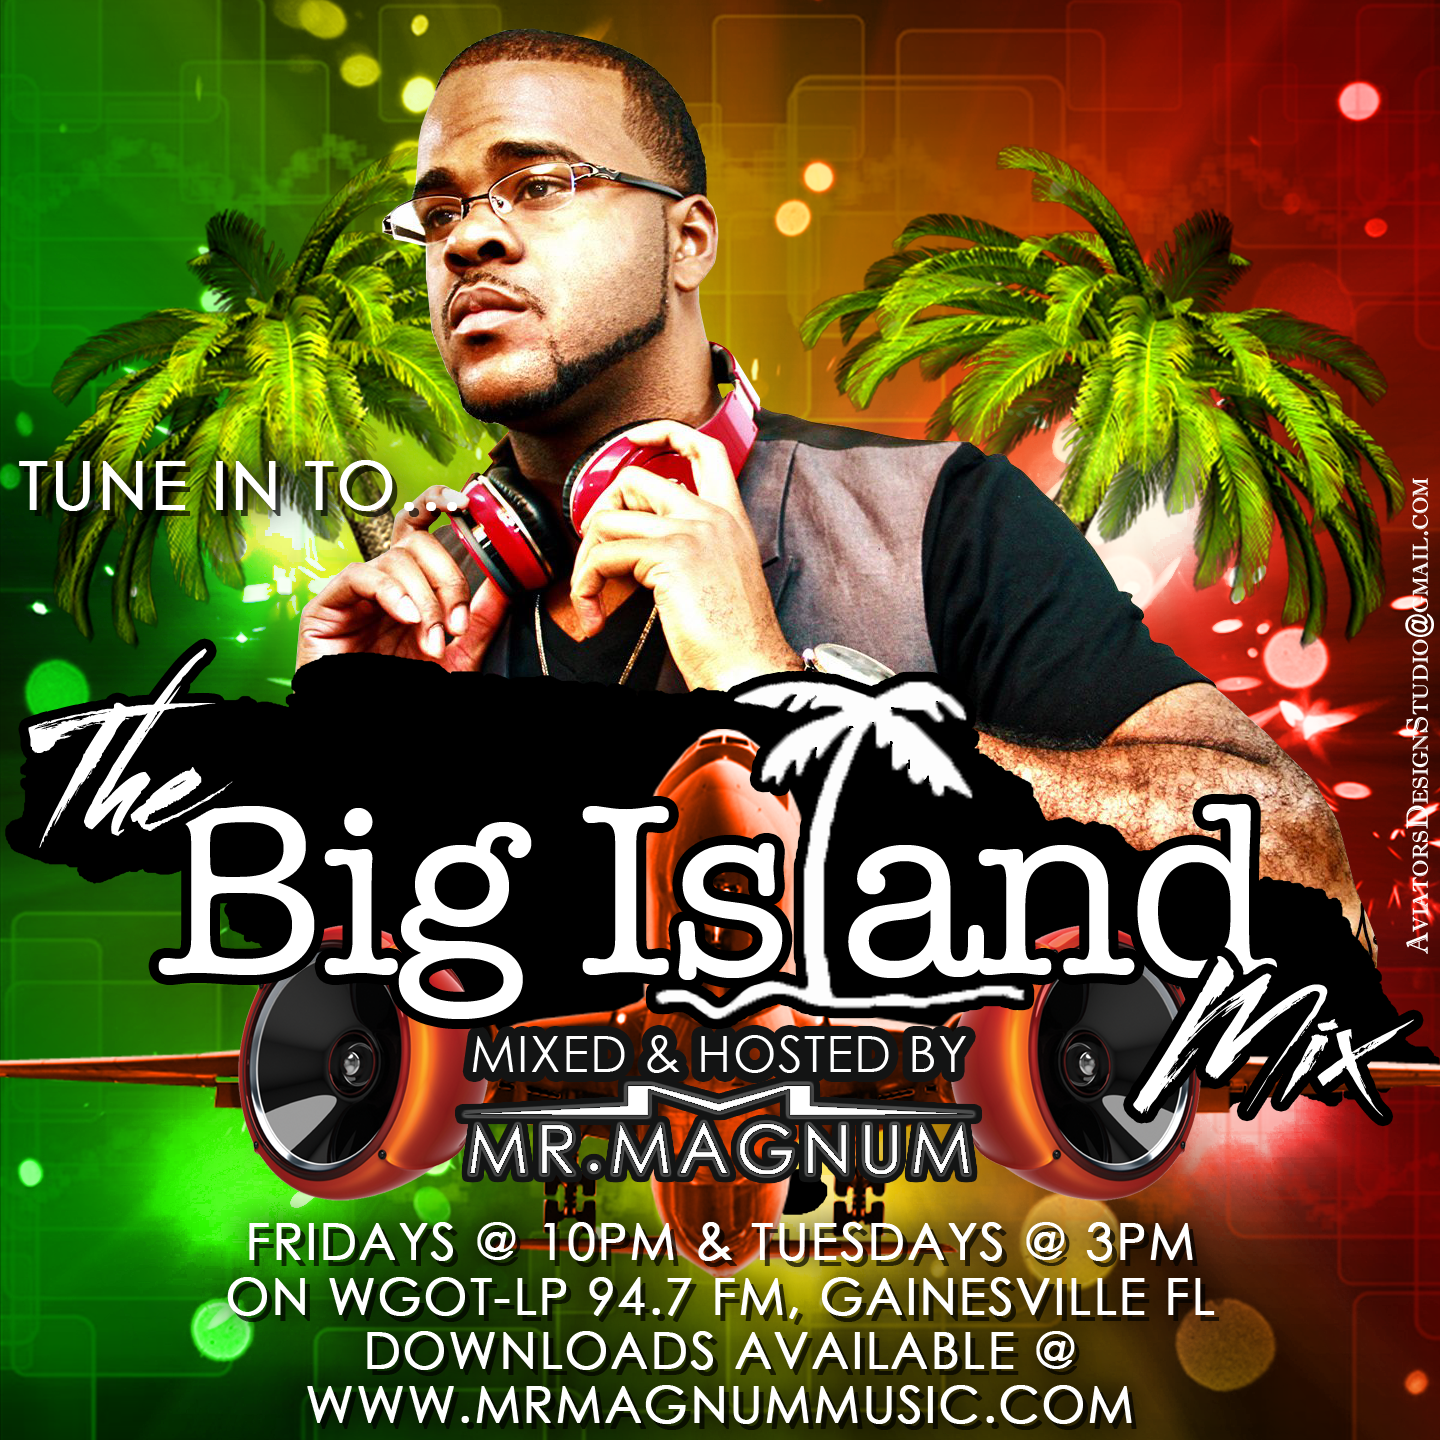 A high energy mix of music from the caribbean, including Reggae, Dancehalle, Soca and More, by your favorite DJ and Gainesville's #1 DJ, Mr. Magnum.